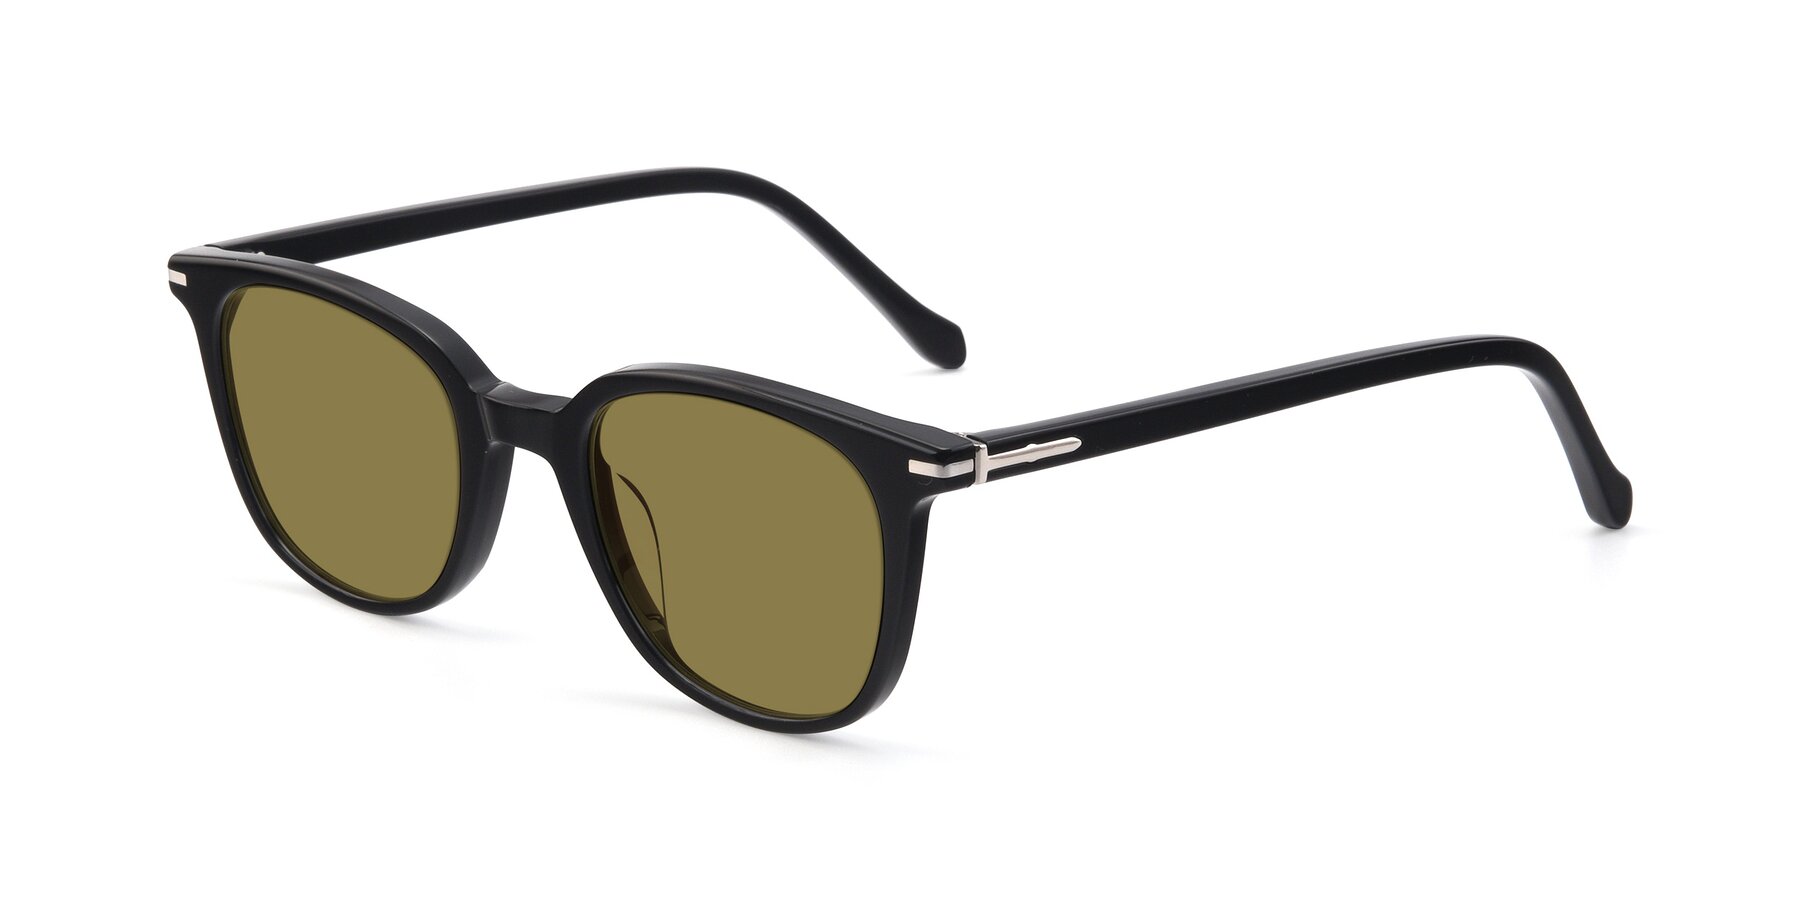 Angle of 17562 in Black with Brown Polarized Lenses